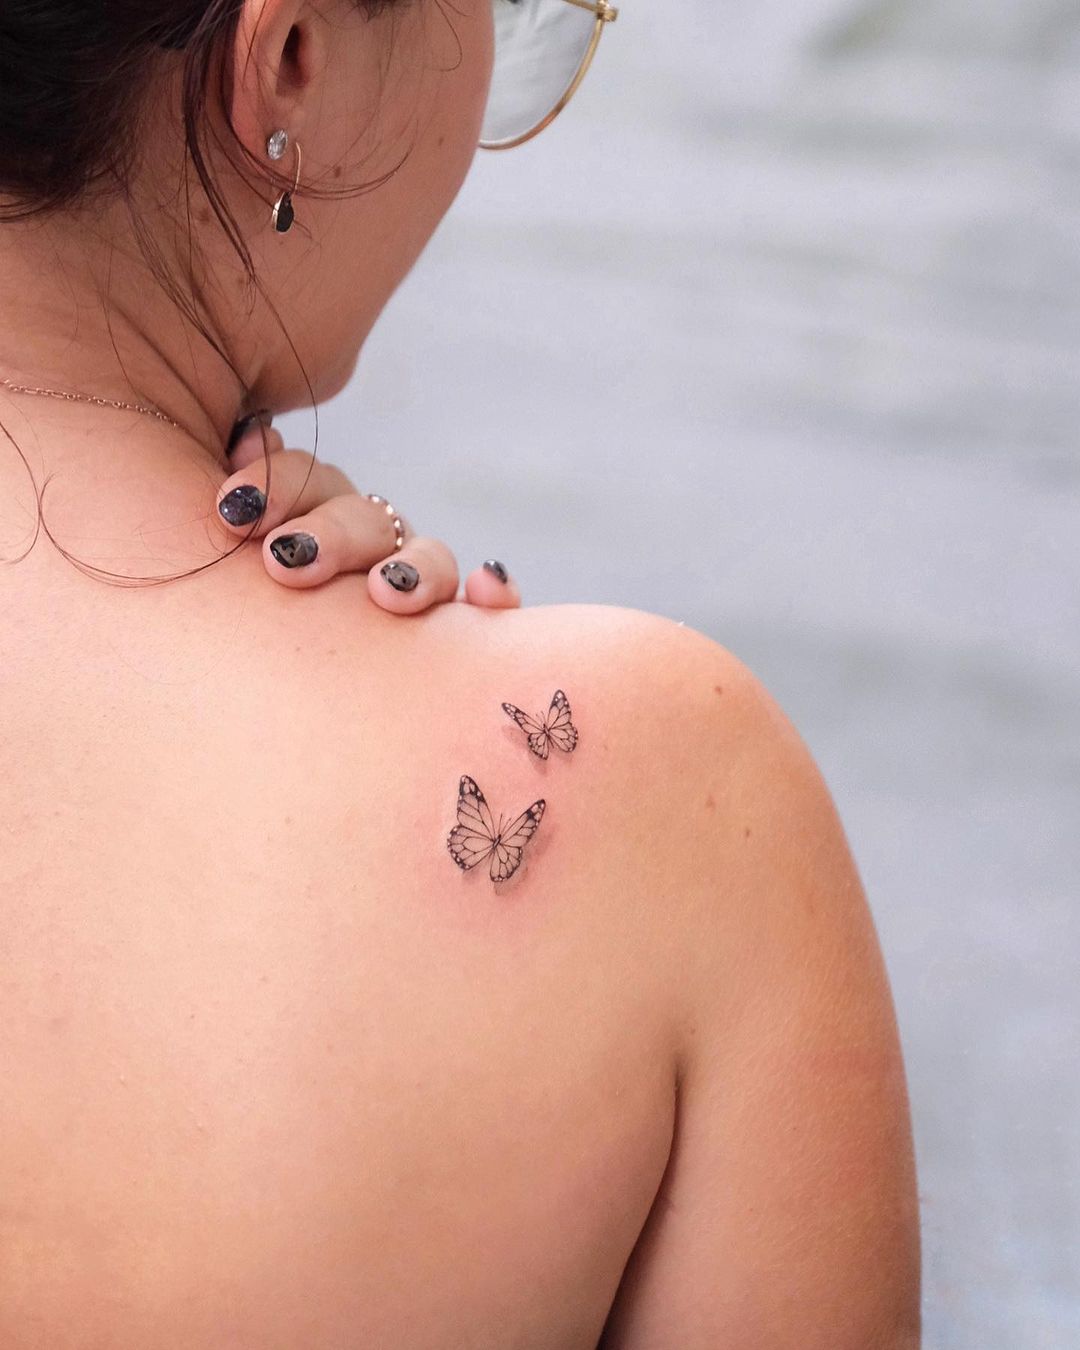 Butterfly Whispers Small Tattoo For Women